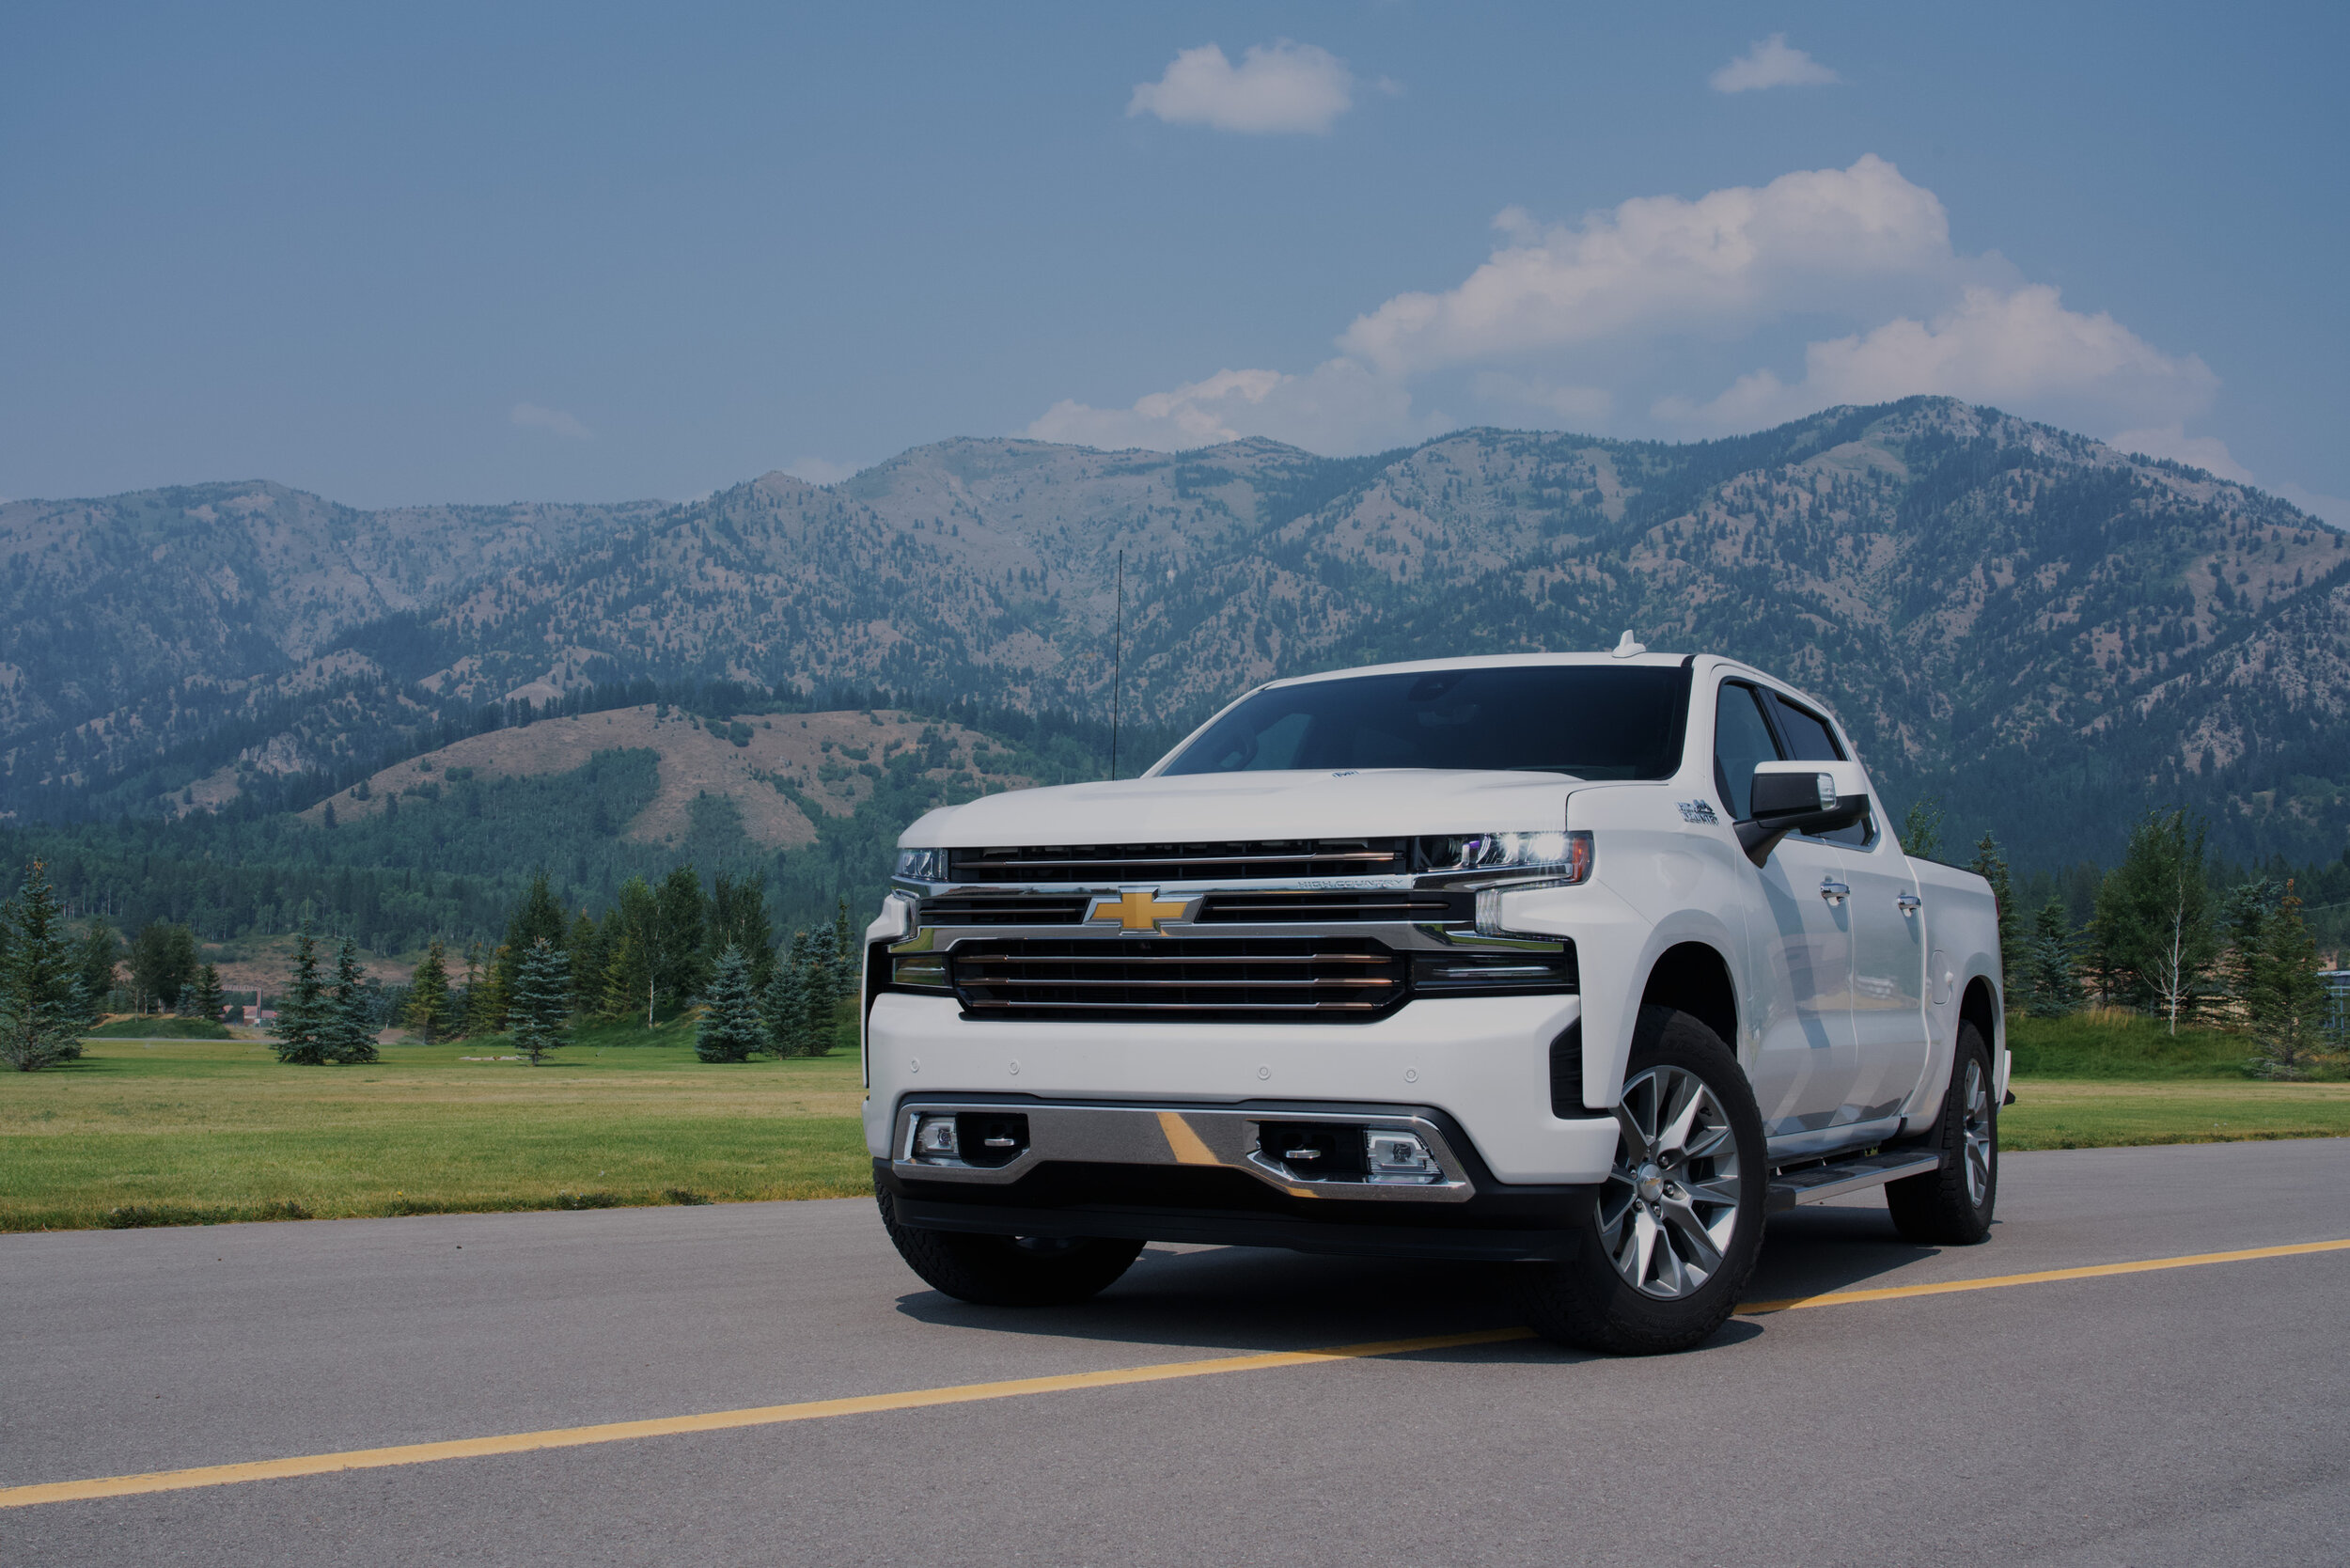 Chevy_Front45_Mountains_WEB.jpg